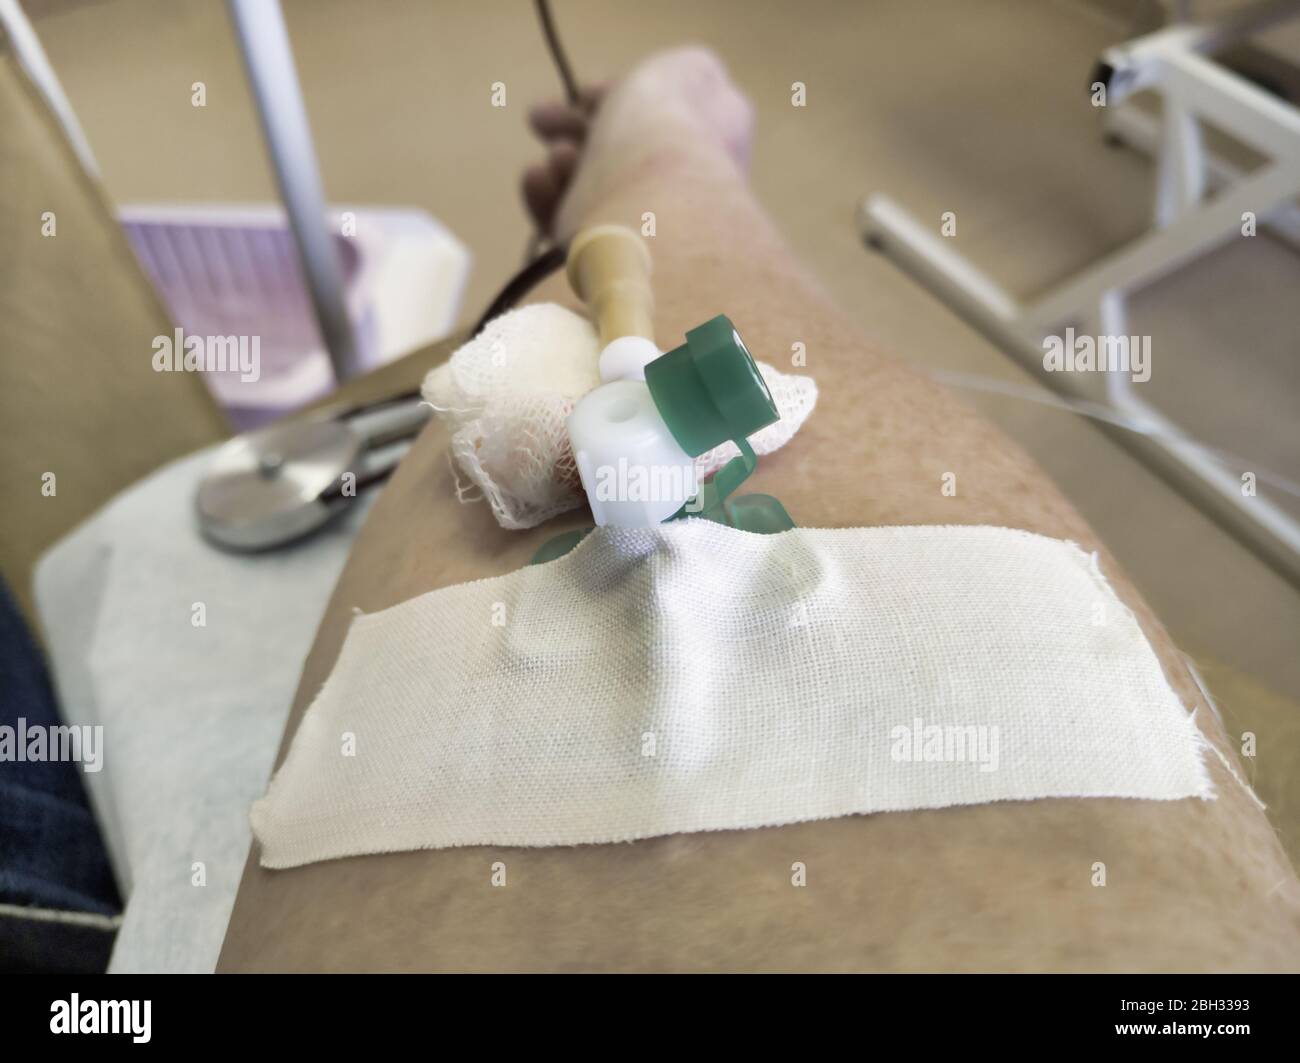 Blood transfusion. Intravenous catheter in the patient's hand Stock Photo